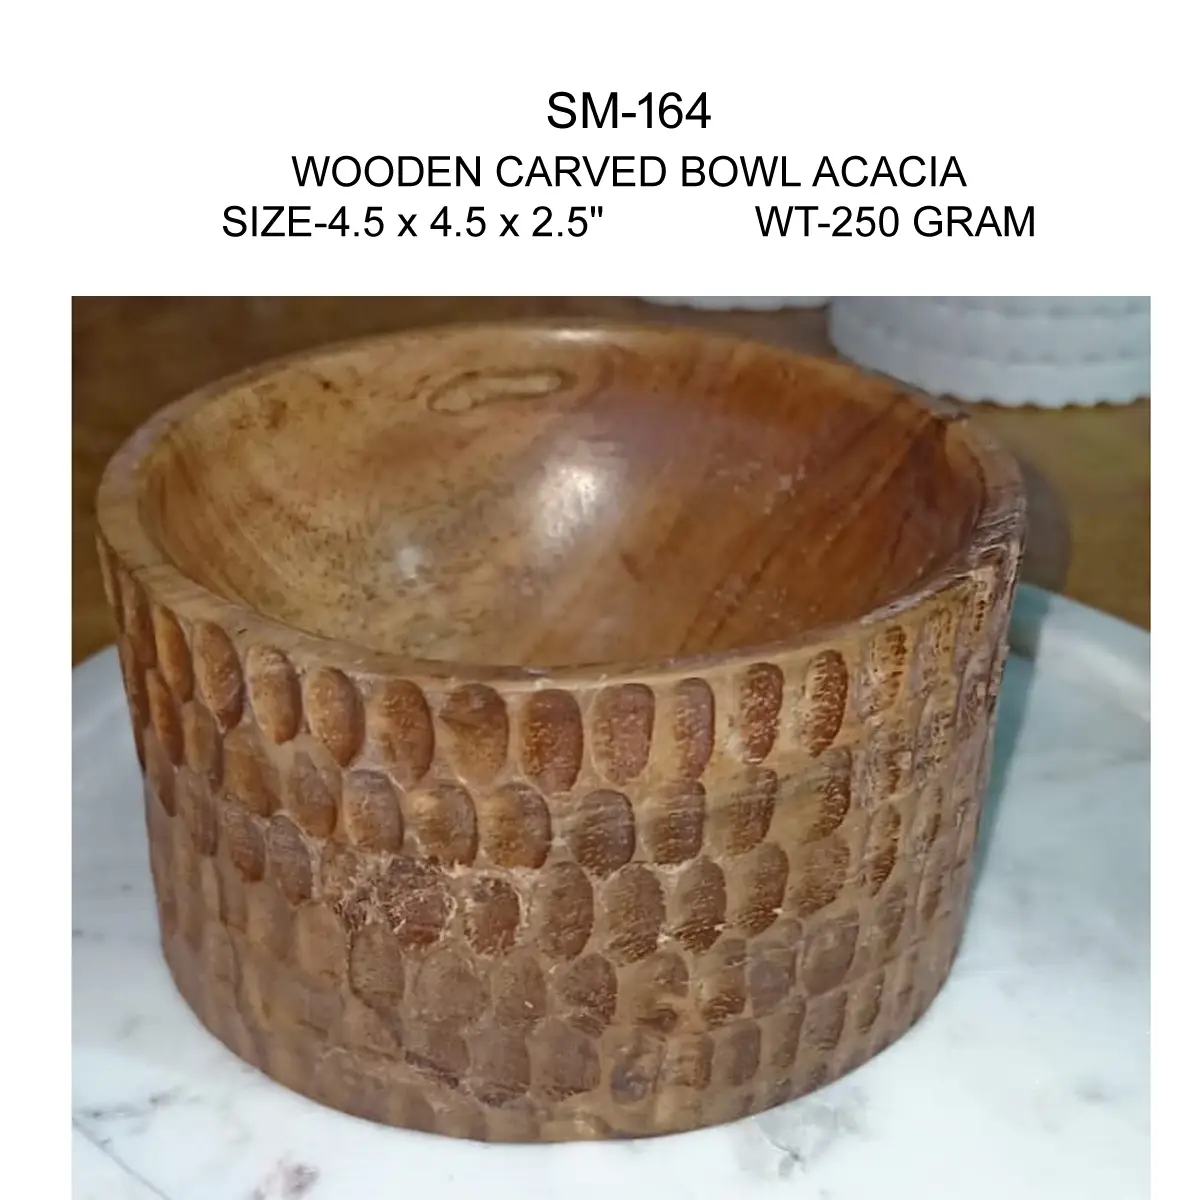 WOODEN CARVED BOWL ACACIA